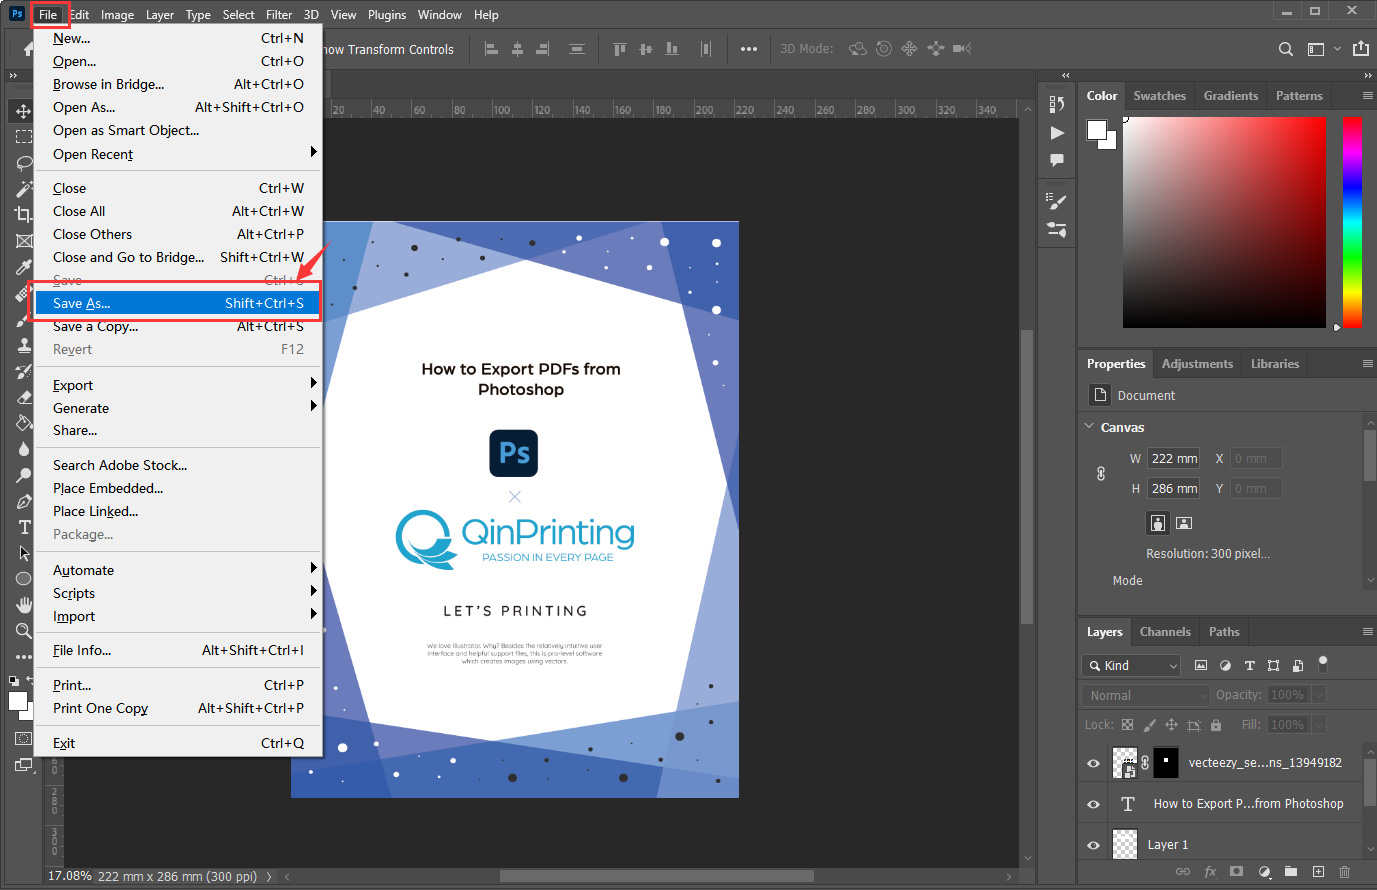 How to Export PDFs from Photoshop Step 1